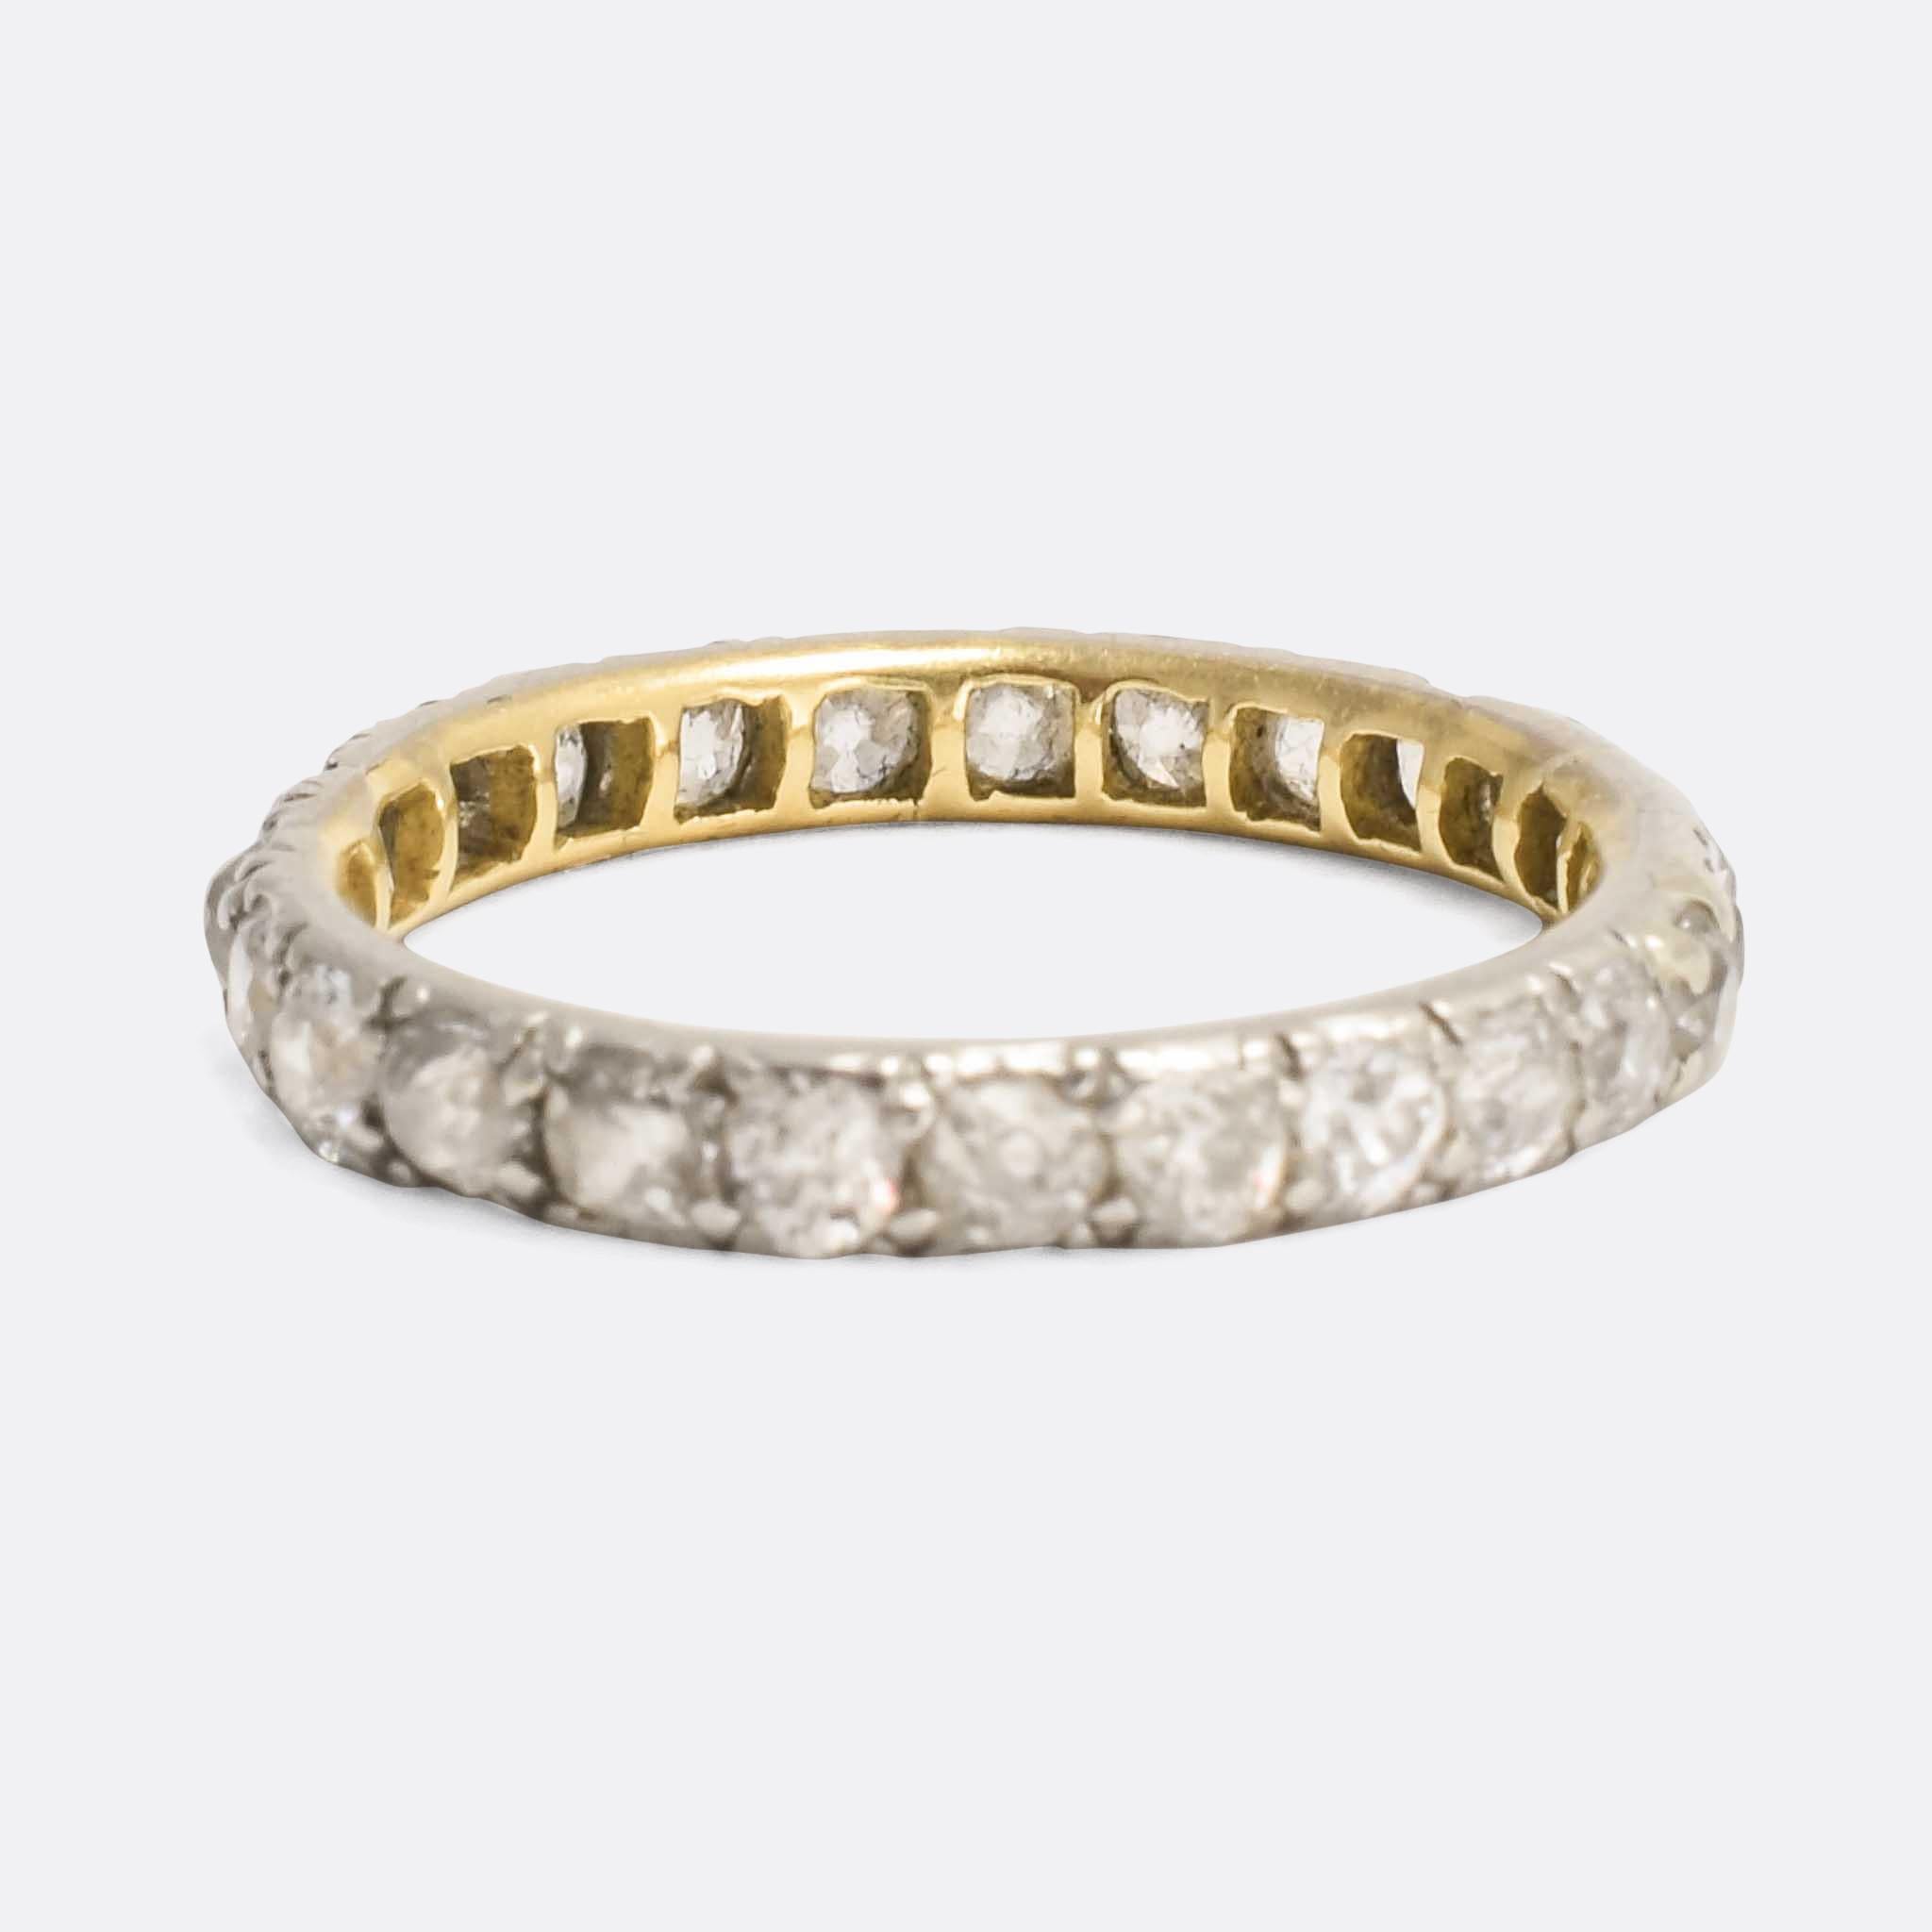 An original early Victorian diamond eternity band, fully set with old European cut stones. Mounted in silver, the 25 stones total approx. 1.25 carats. The piece dates from c.1840, with the inner band modelled in 15 karat gold. A particularly fine